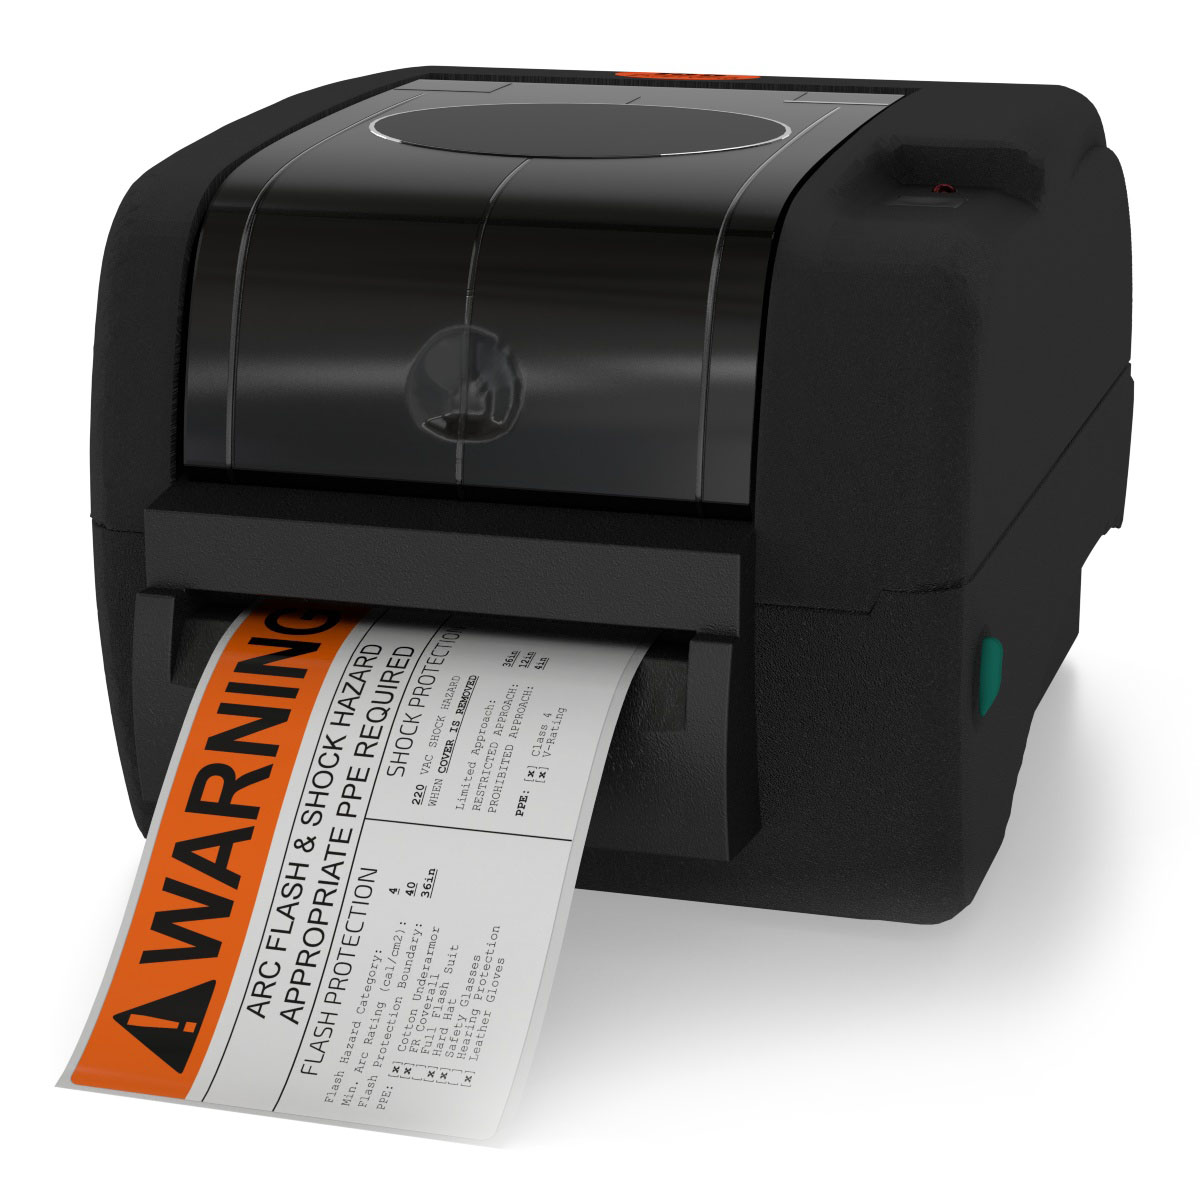 Detail view for SafetyPro 300 Industrial Label Printer